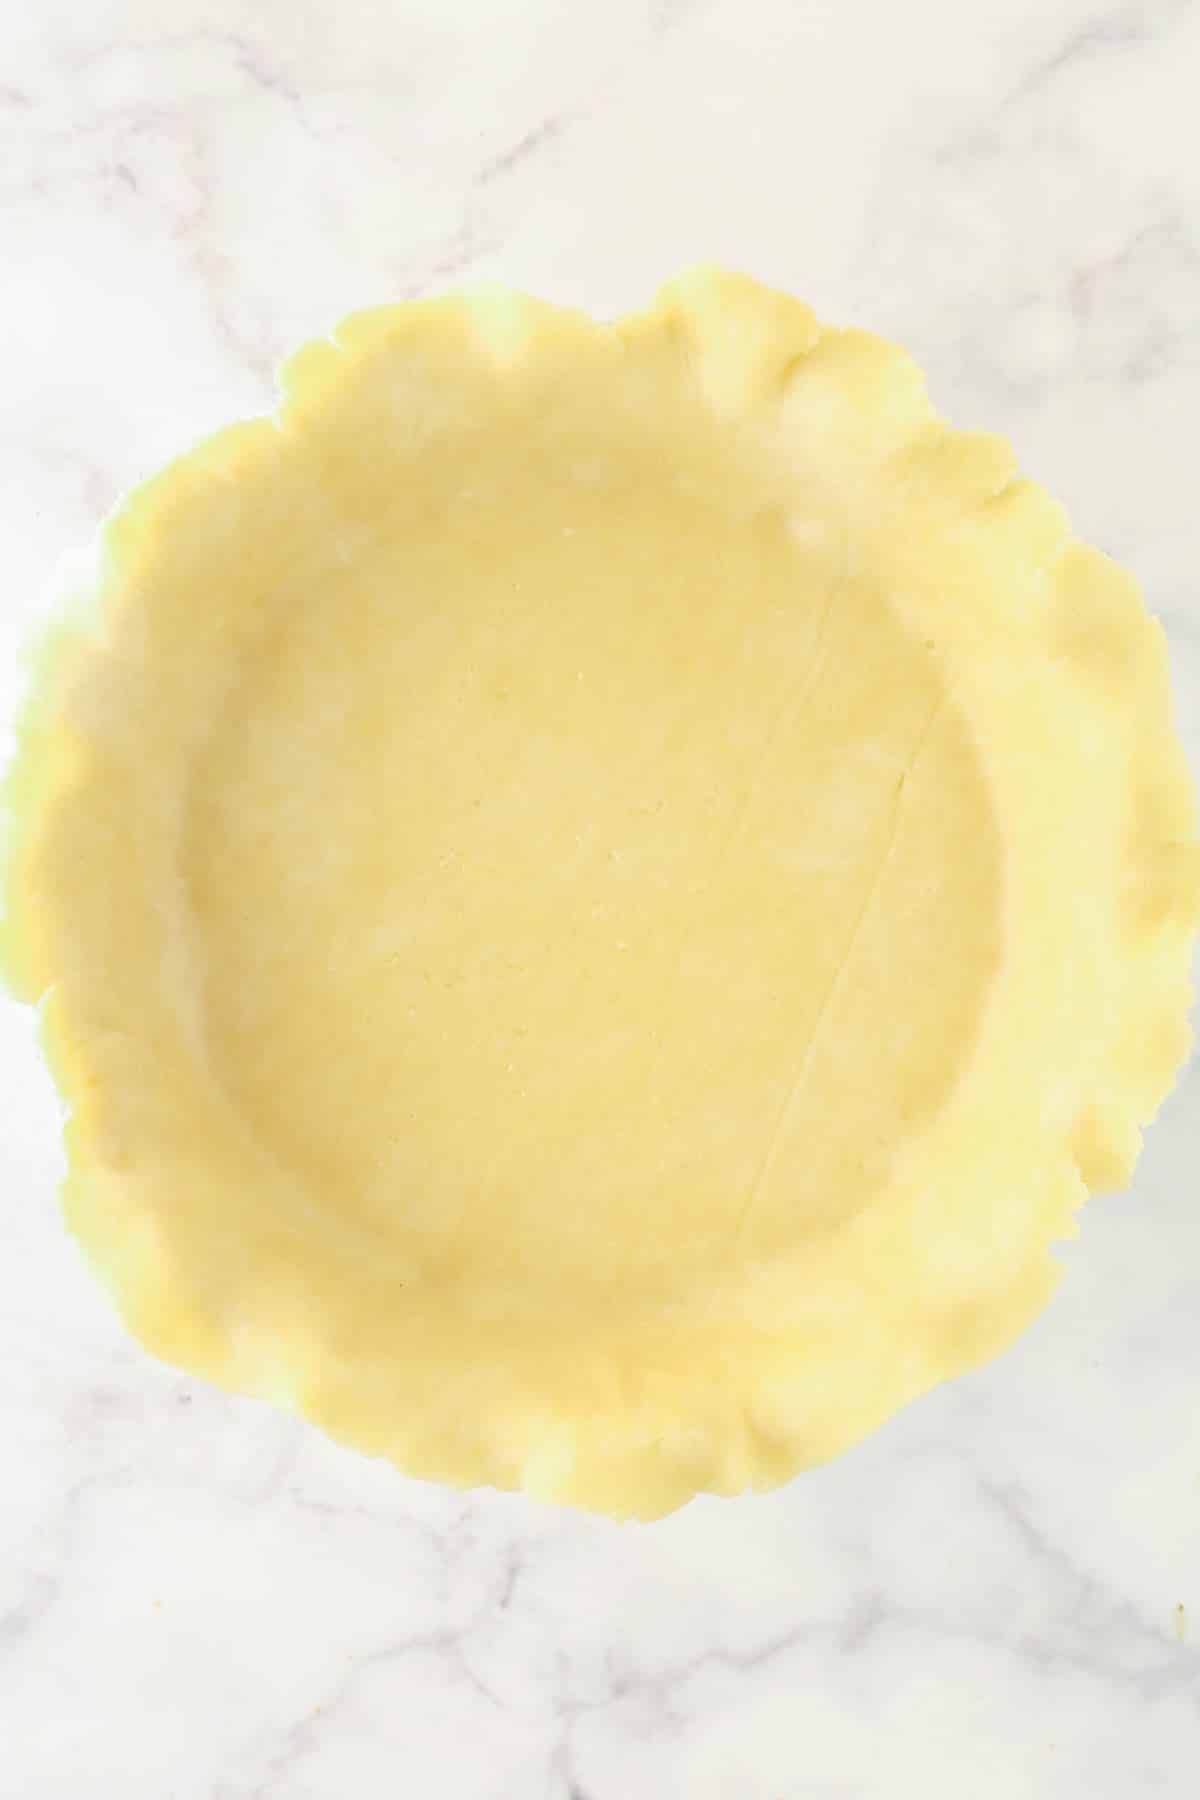 Pie crust dough fitted to a pie pan.